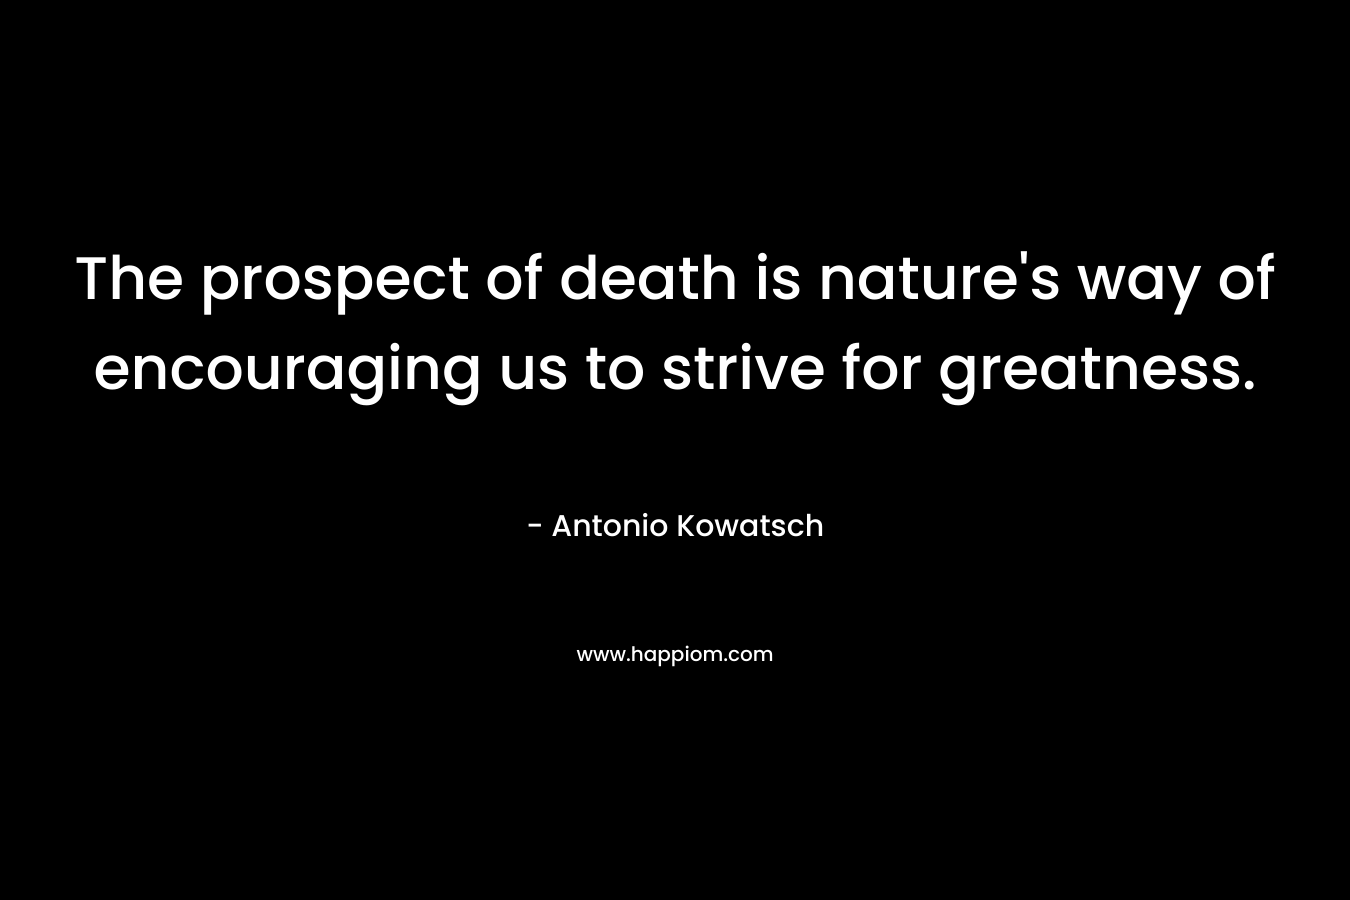 The prospect of death is nature’s way of encouraging us to strive for greatness. – Antonio Kowatsch